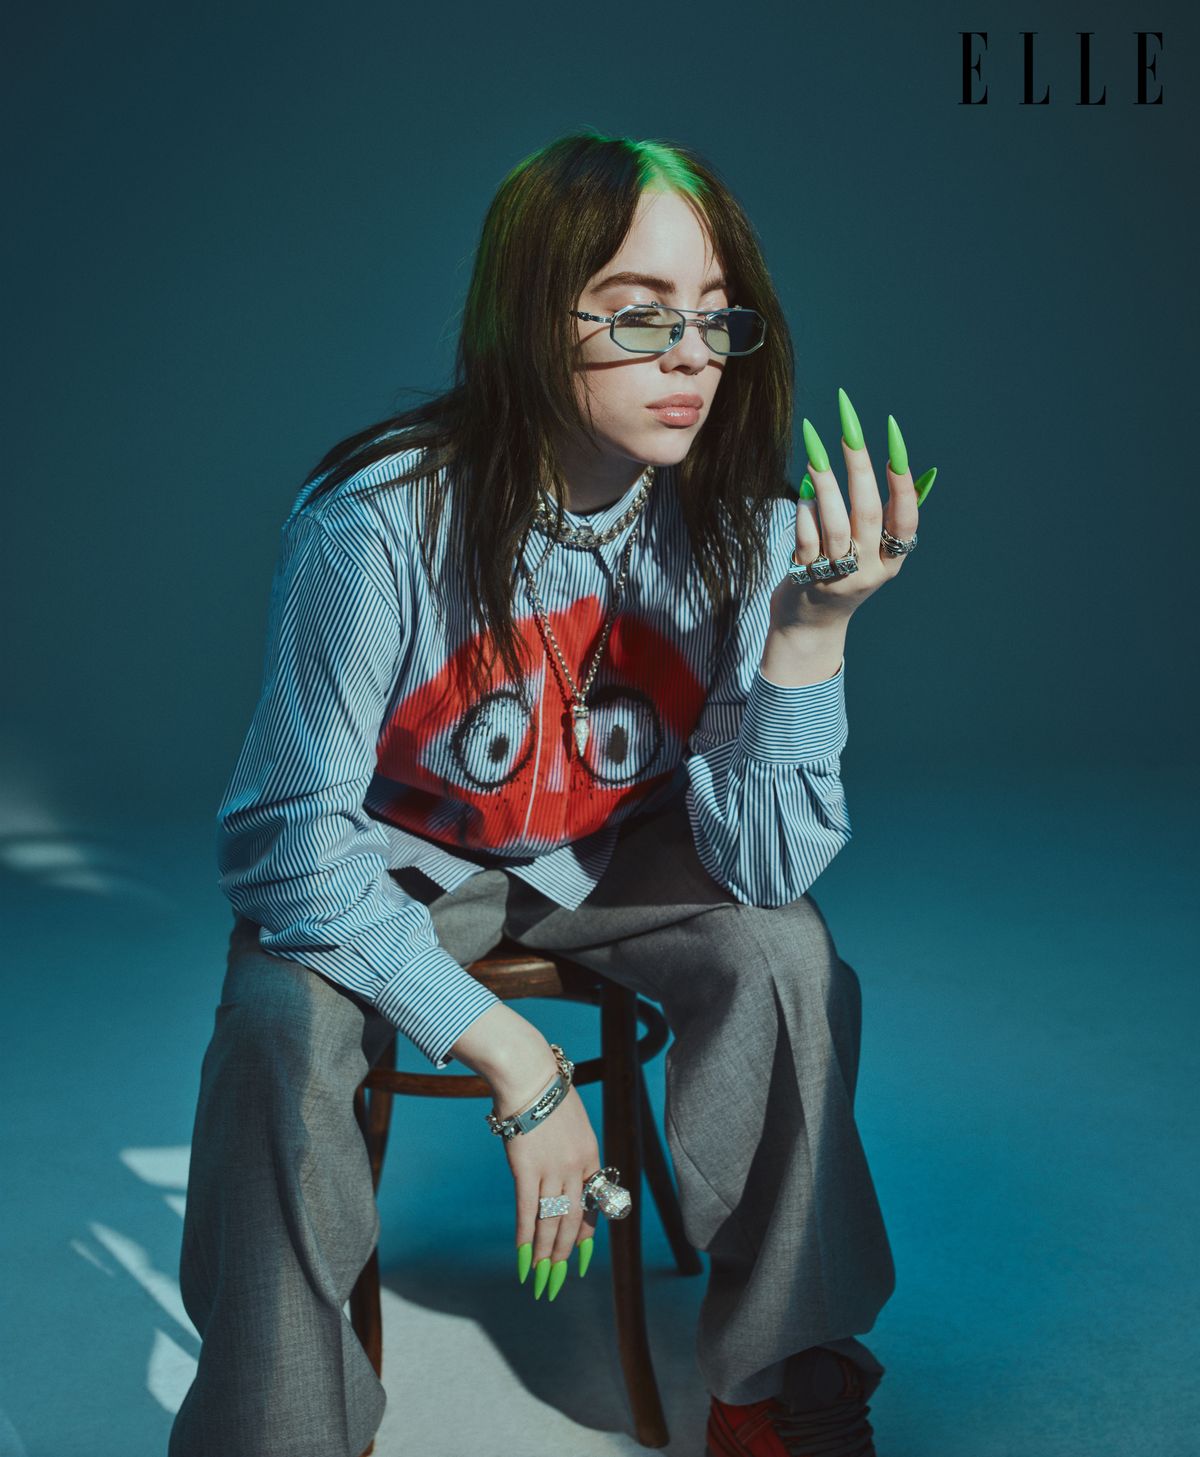 Small Boobs Teen - Billie Eilish Still Can't Believe Her Boobs Trended on Twitter